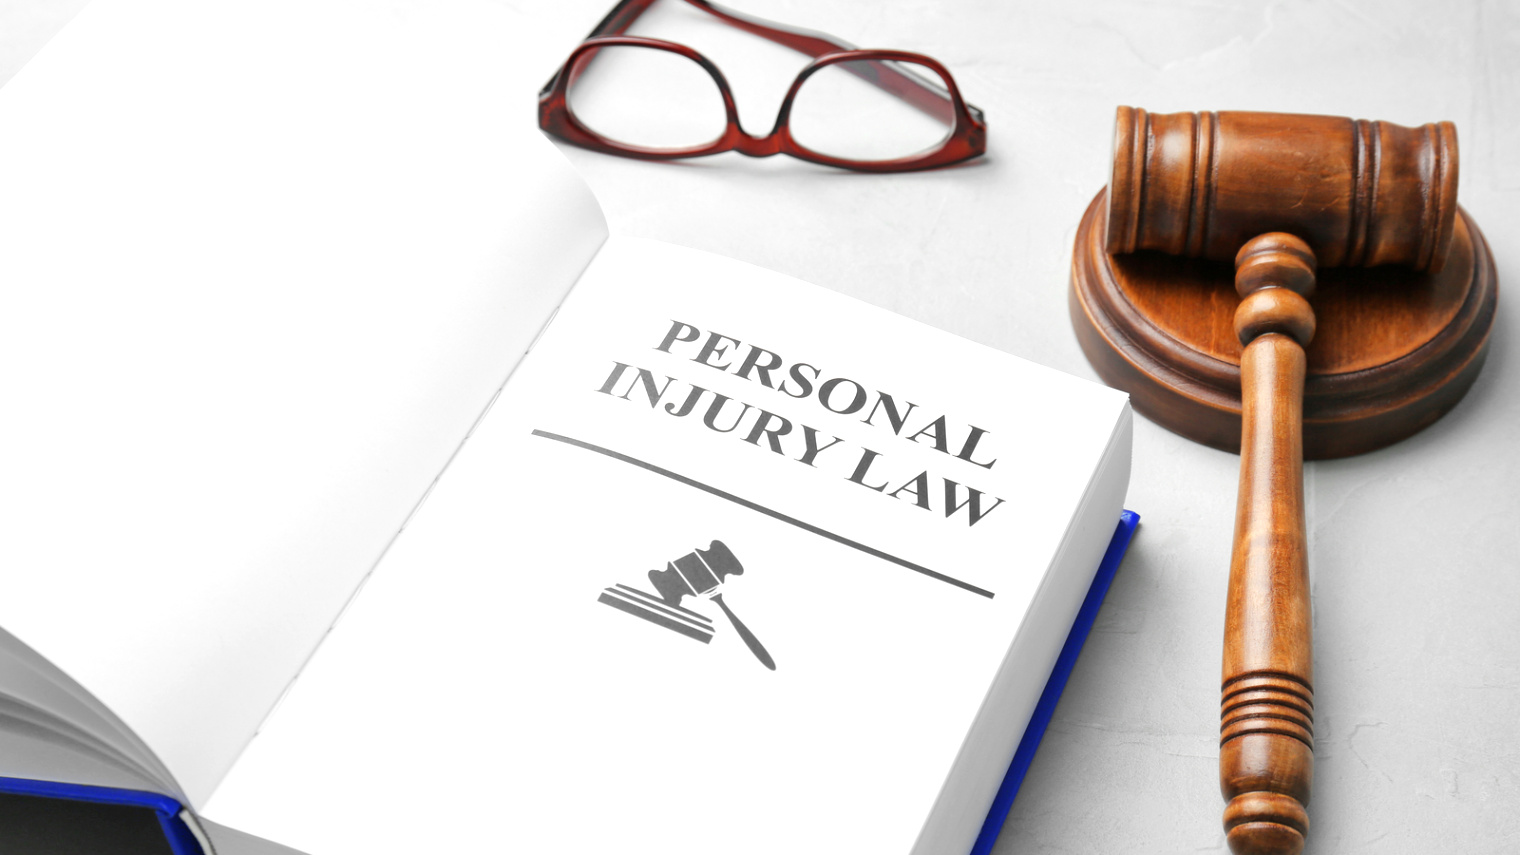 Personil Injury Lawyer In East Carroll La Dans Personal Injury Lawyer Chicago, Il Car Accident attorneys ...